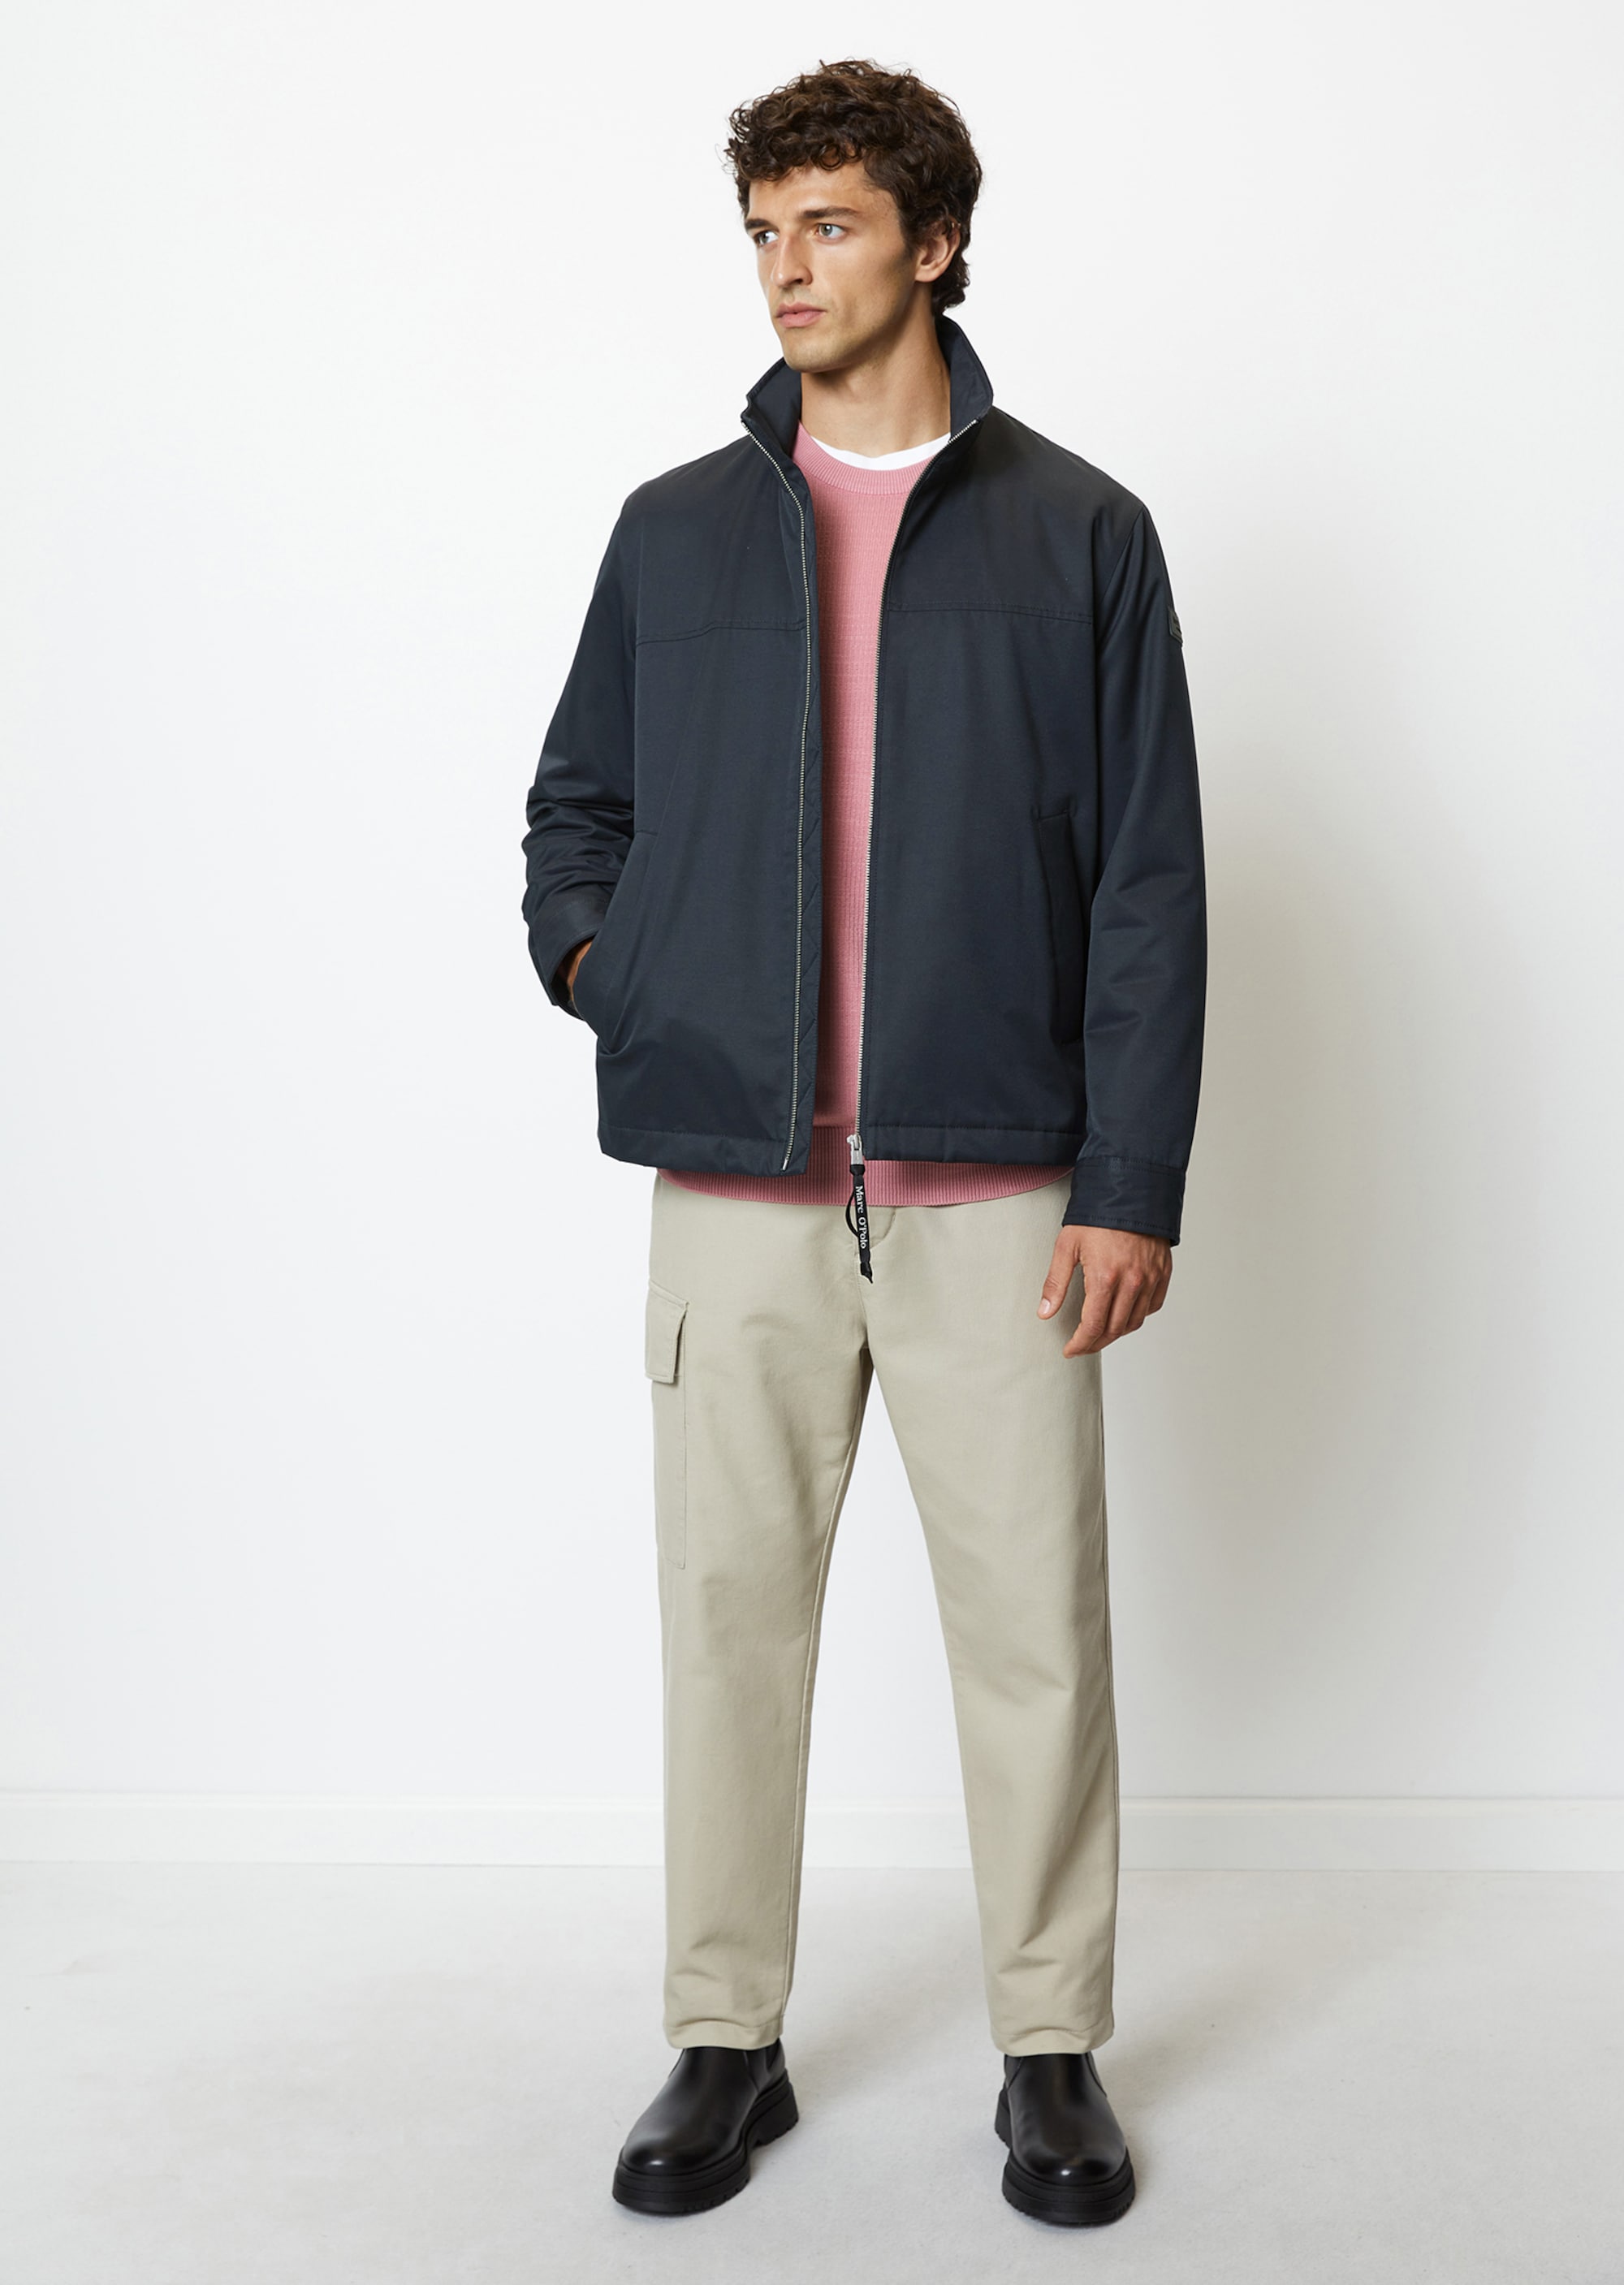 Stand up collar jacket in micro twill quality   blue   Jackets